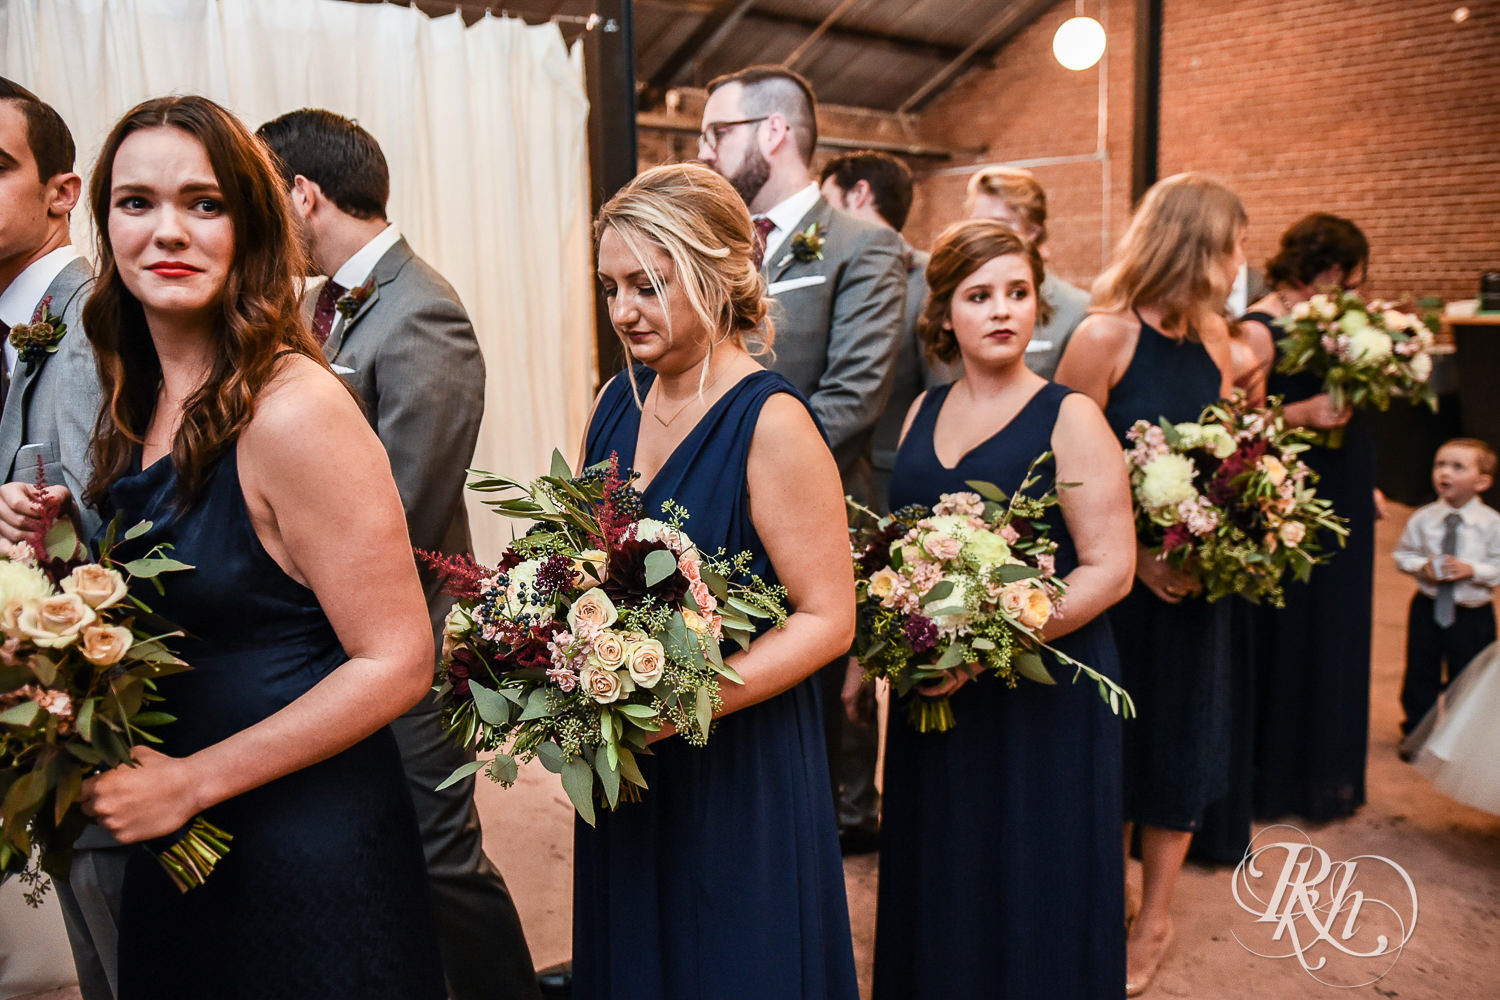 Wedding party lines up before wedding ceremony at Paikka in Saint Paul, Minnesota.